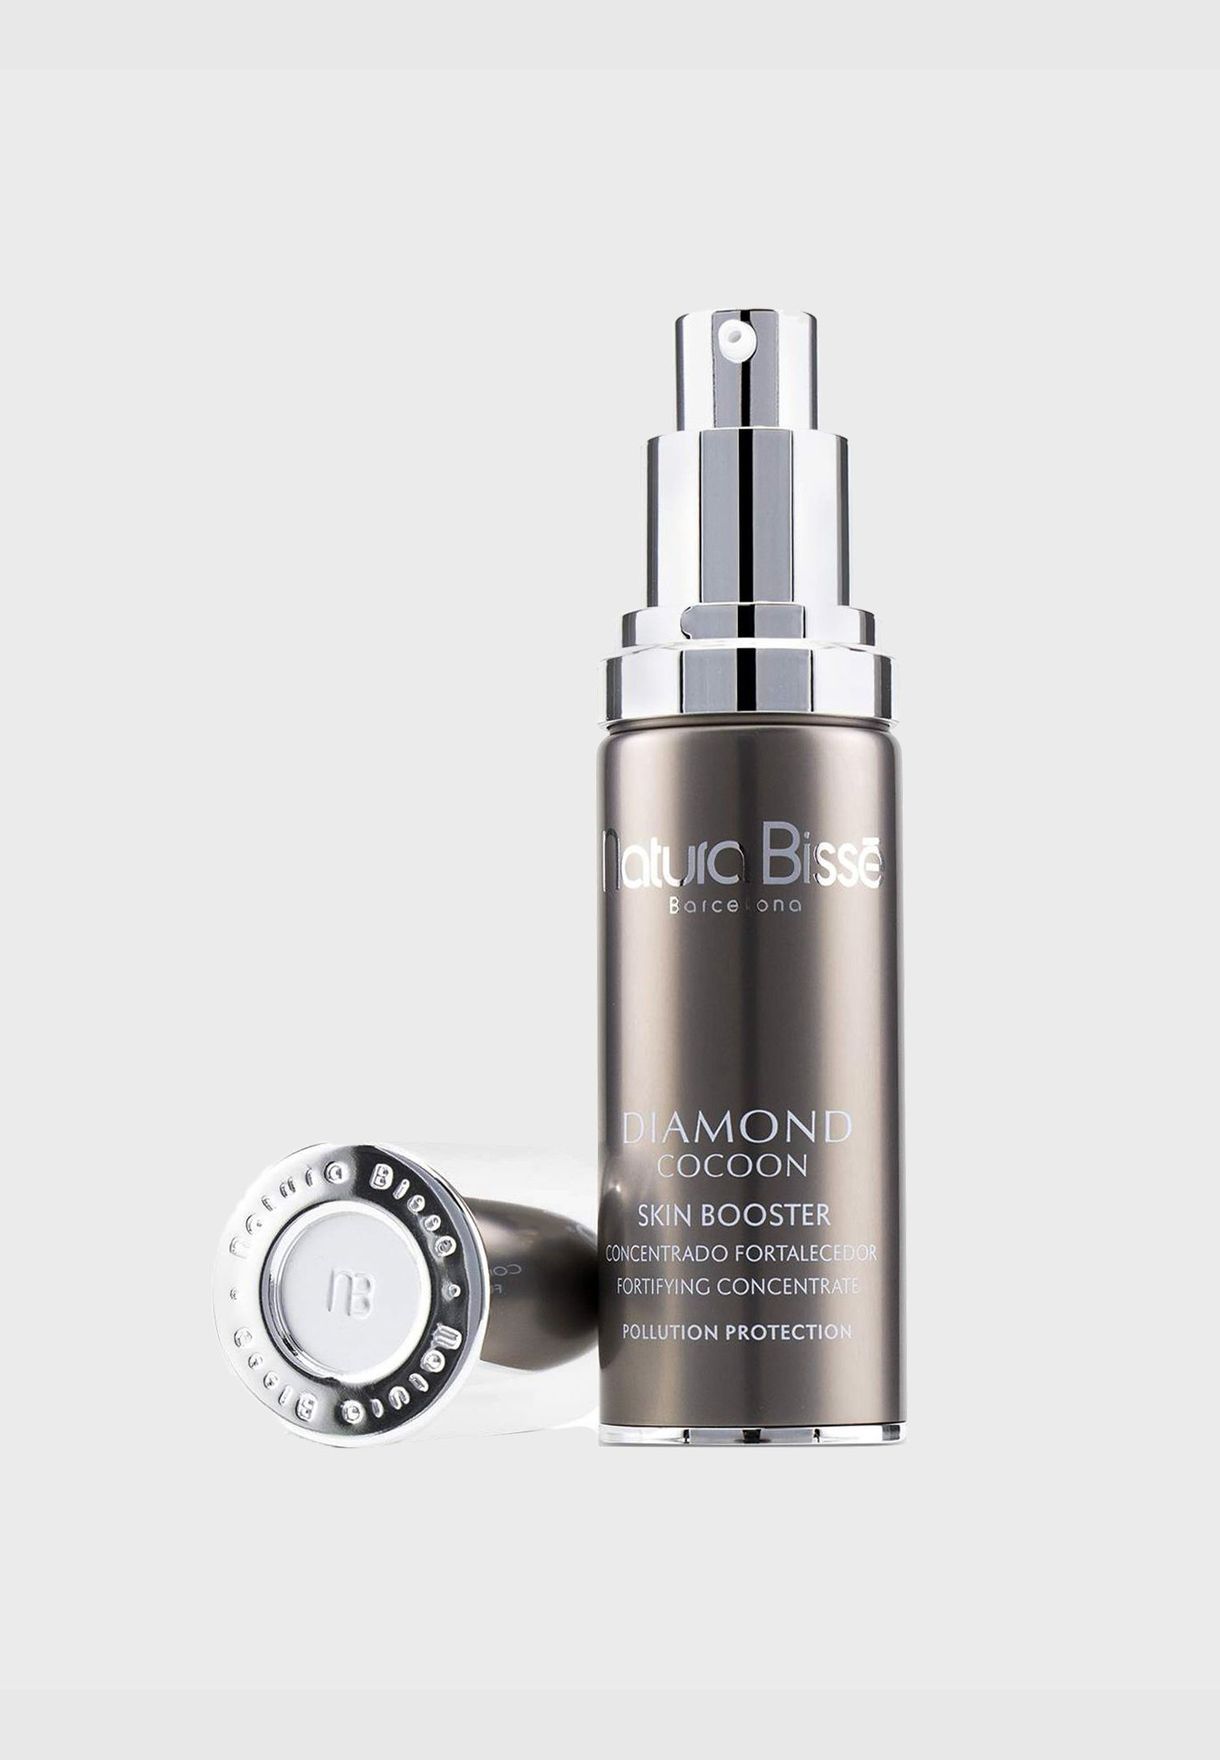 Diamond Cocoon Skin Booster Fortifying Concentrate